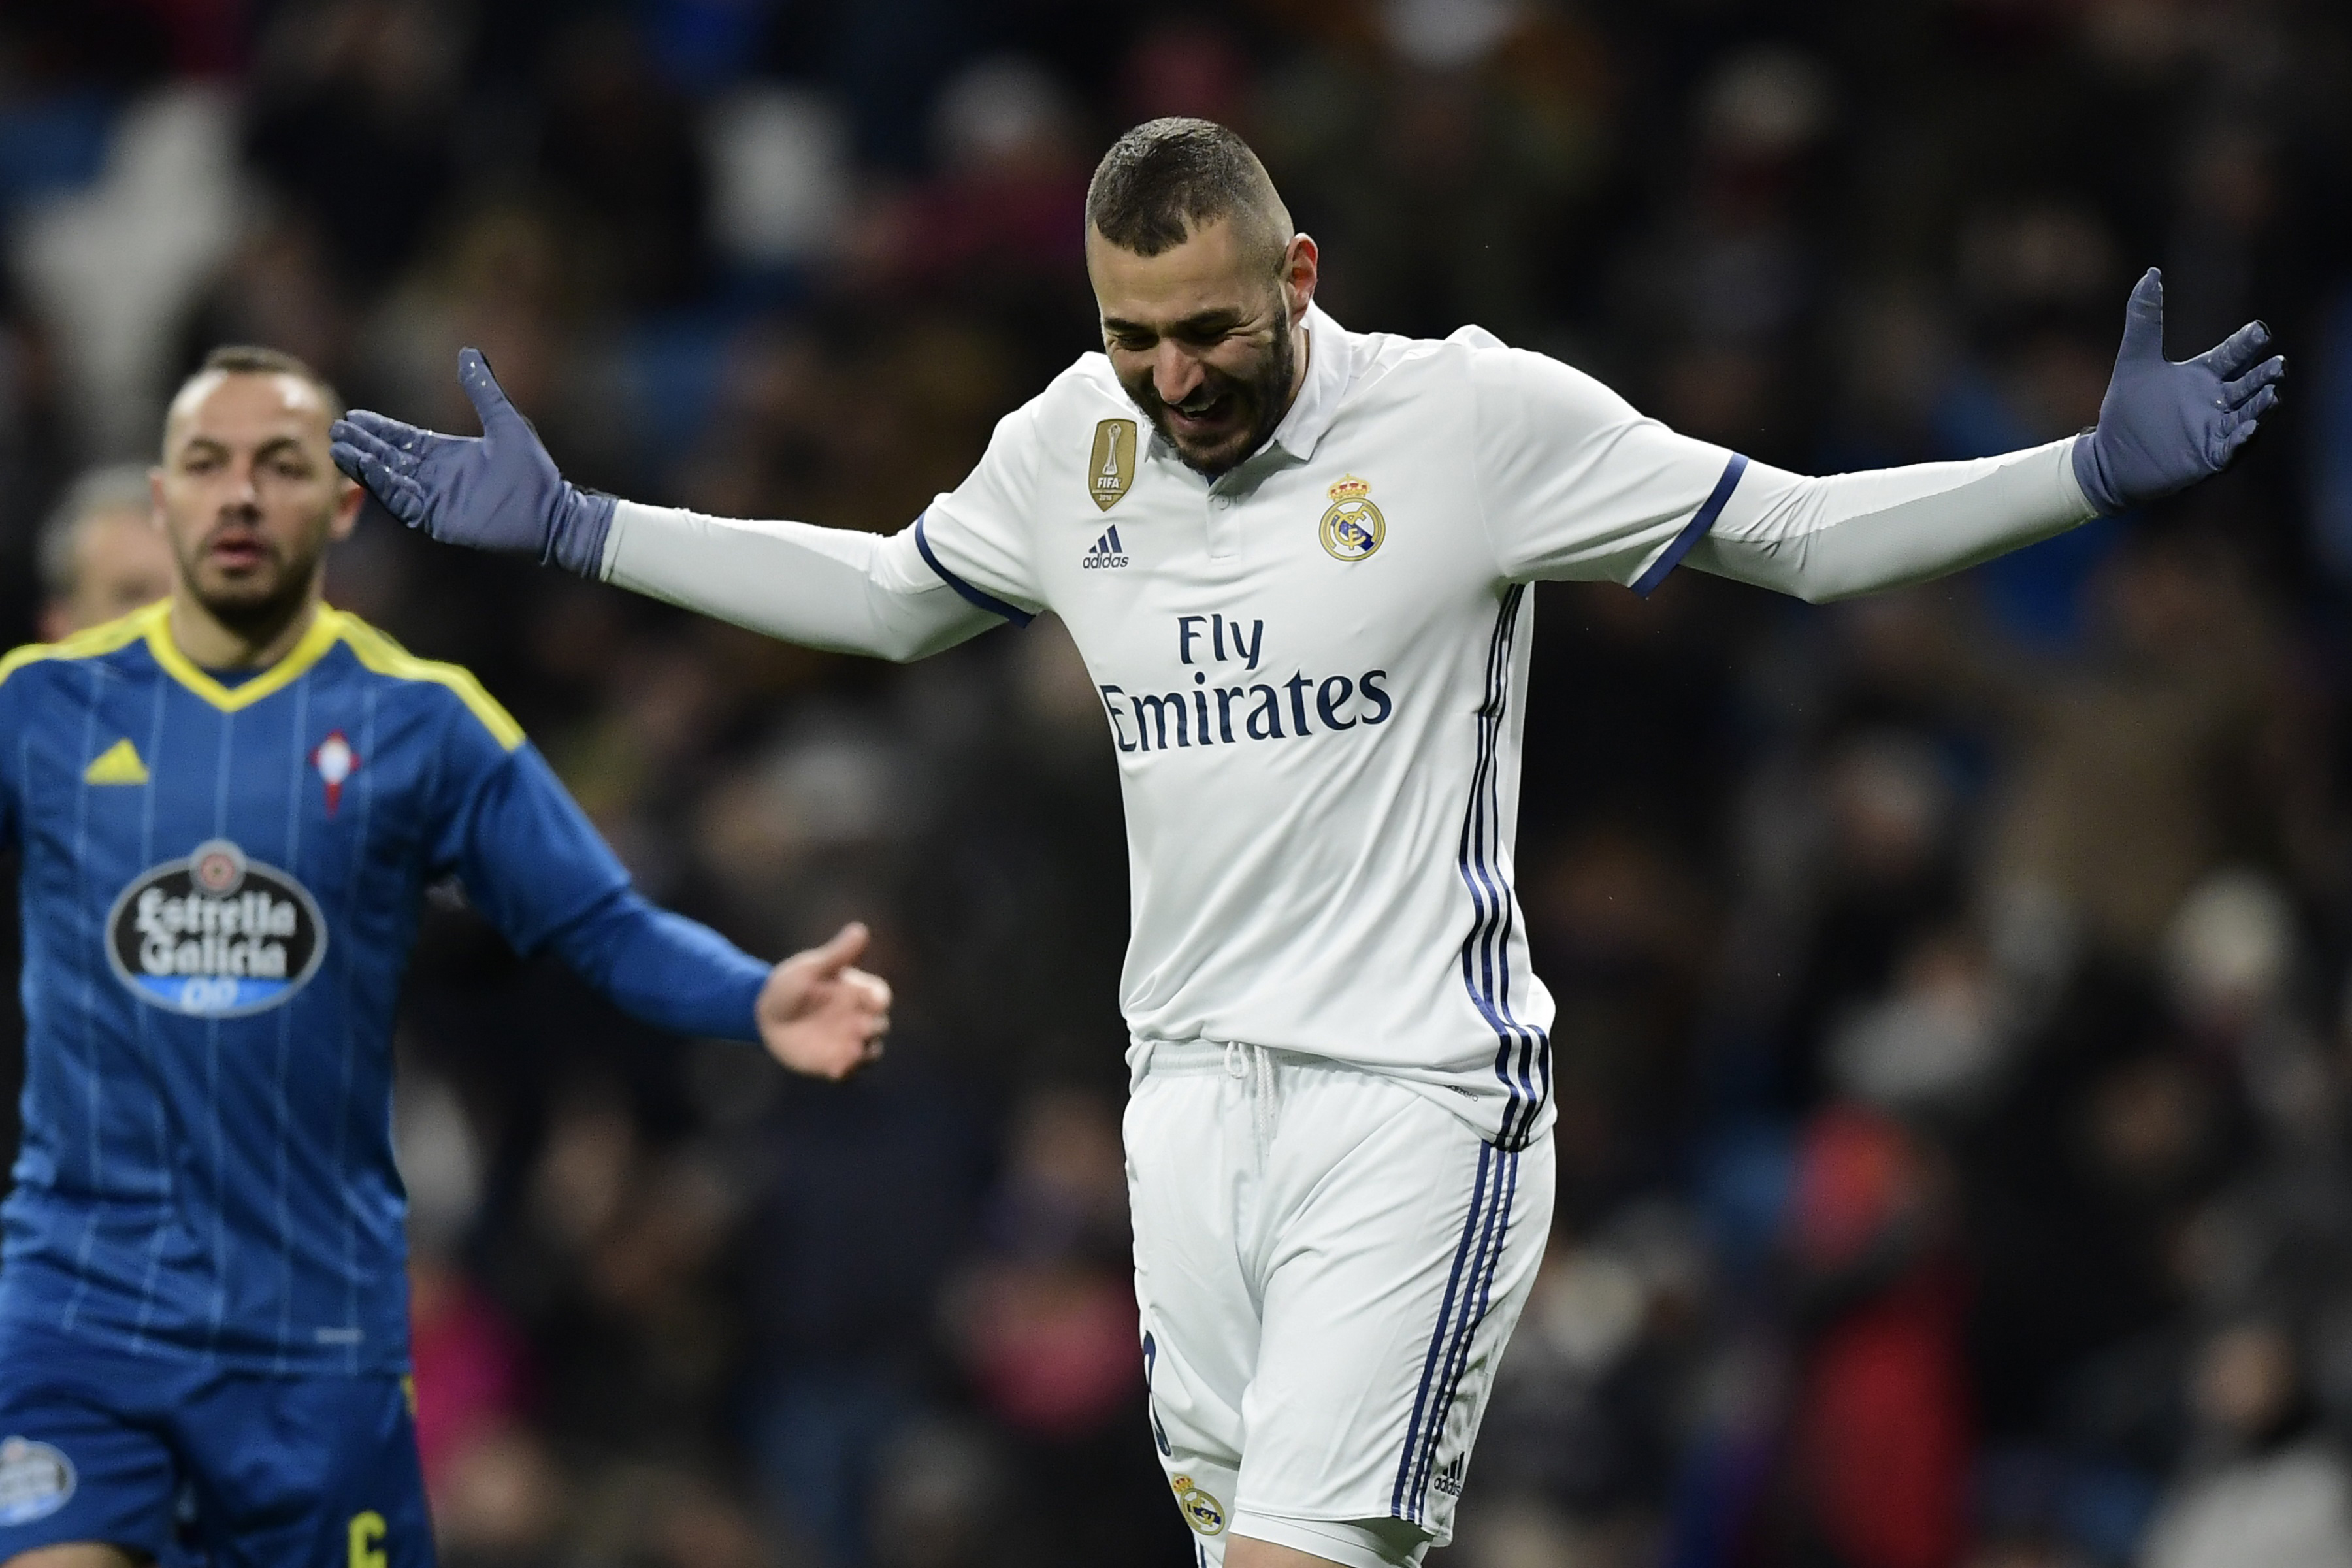 Real Madrid's French forward Karim Benzema gestures after missing a goal opportunity during the Spanish Copa del Rey (King's Cup) quarter-final first leg football match Real Madrid CF vs RC Celta de Vigo at the Santiago Bernabeu stadium in Madrid on January 18, 2017. / AFP / JAVIER SORIANO        (Photo credit should read JAVIER SORIANO/AFP/Getty Images)